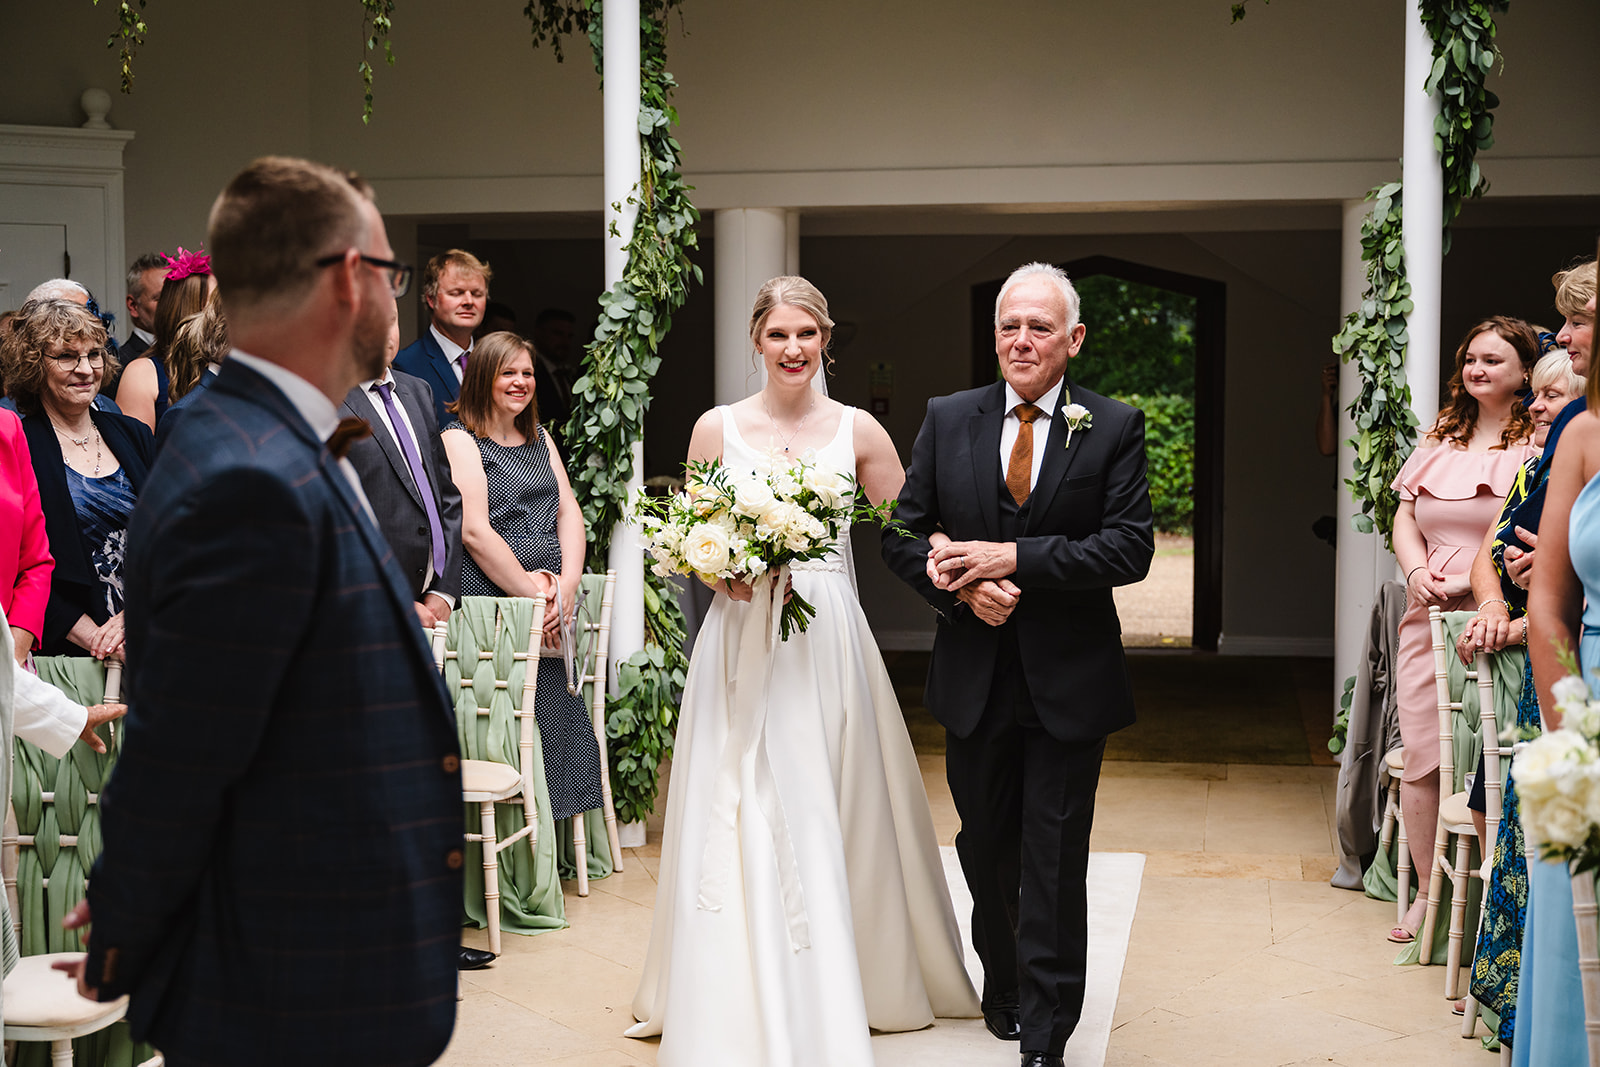 Bride and her father walking down the aisle at Stapleford Park by Amanda Forman Photography